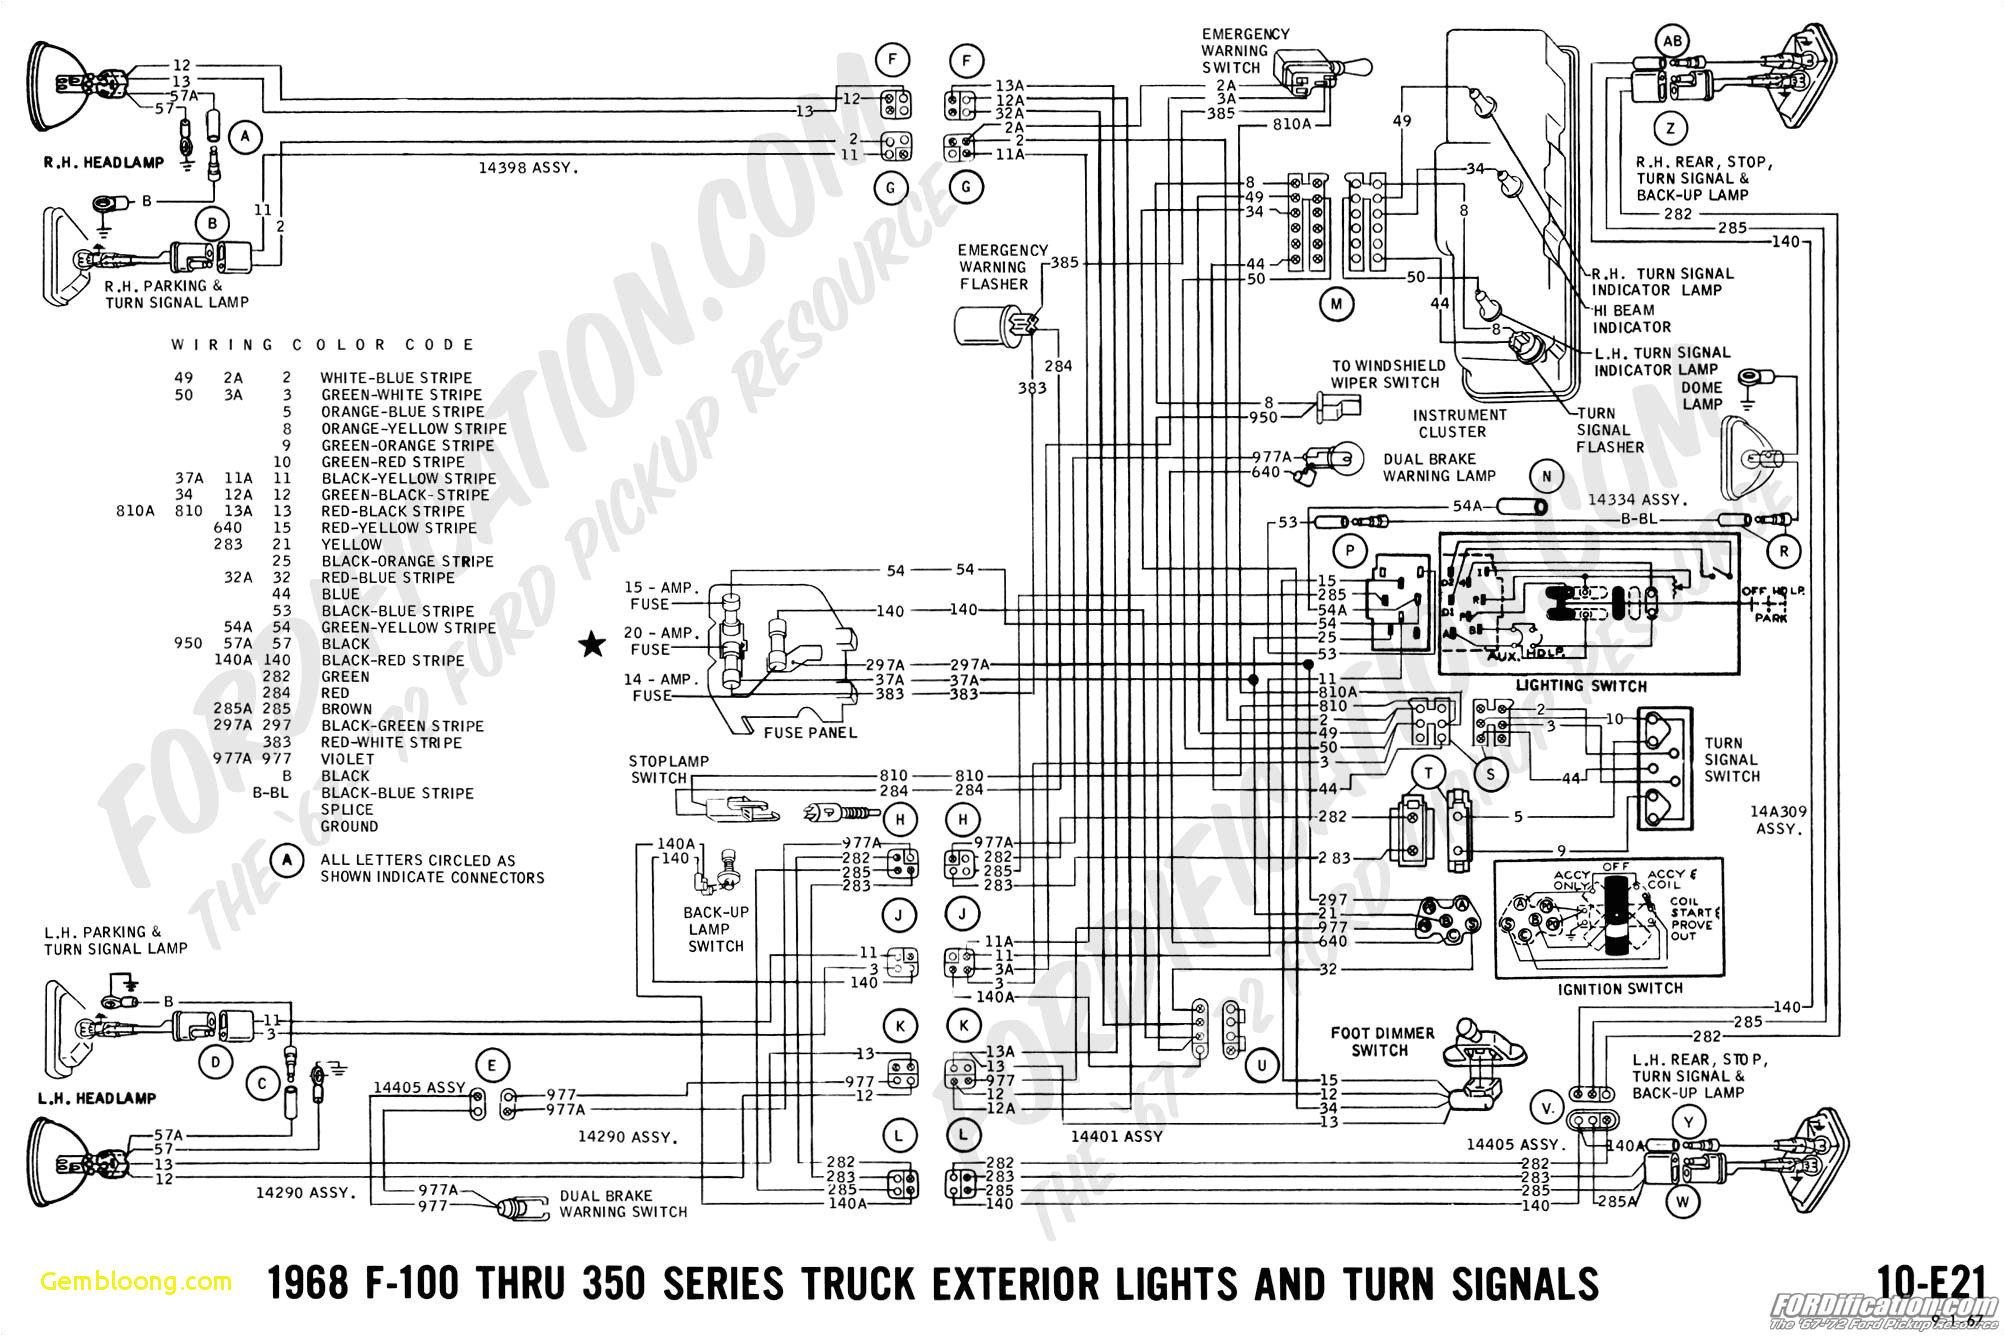 85 ford electrical wiring diagrams data wiring diagram ford figo electrical wiring diagram ford electrical wiring